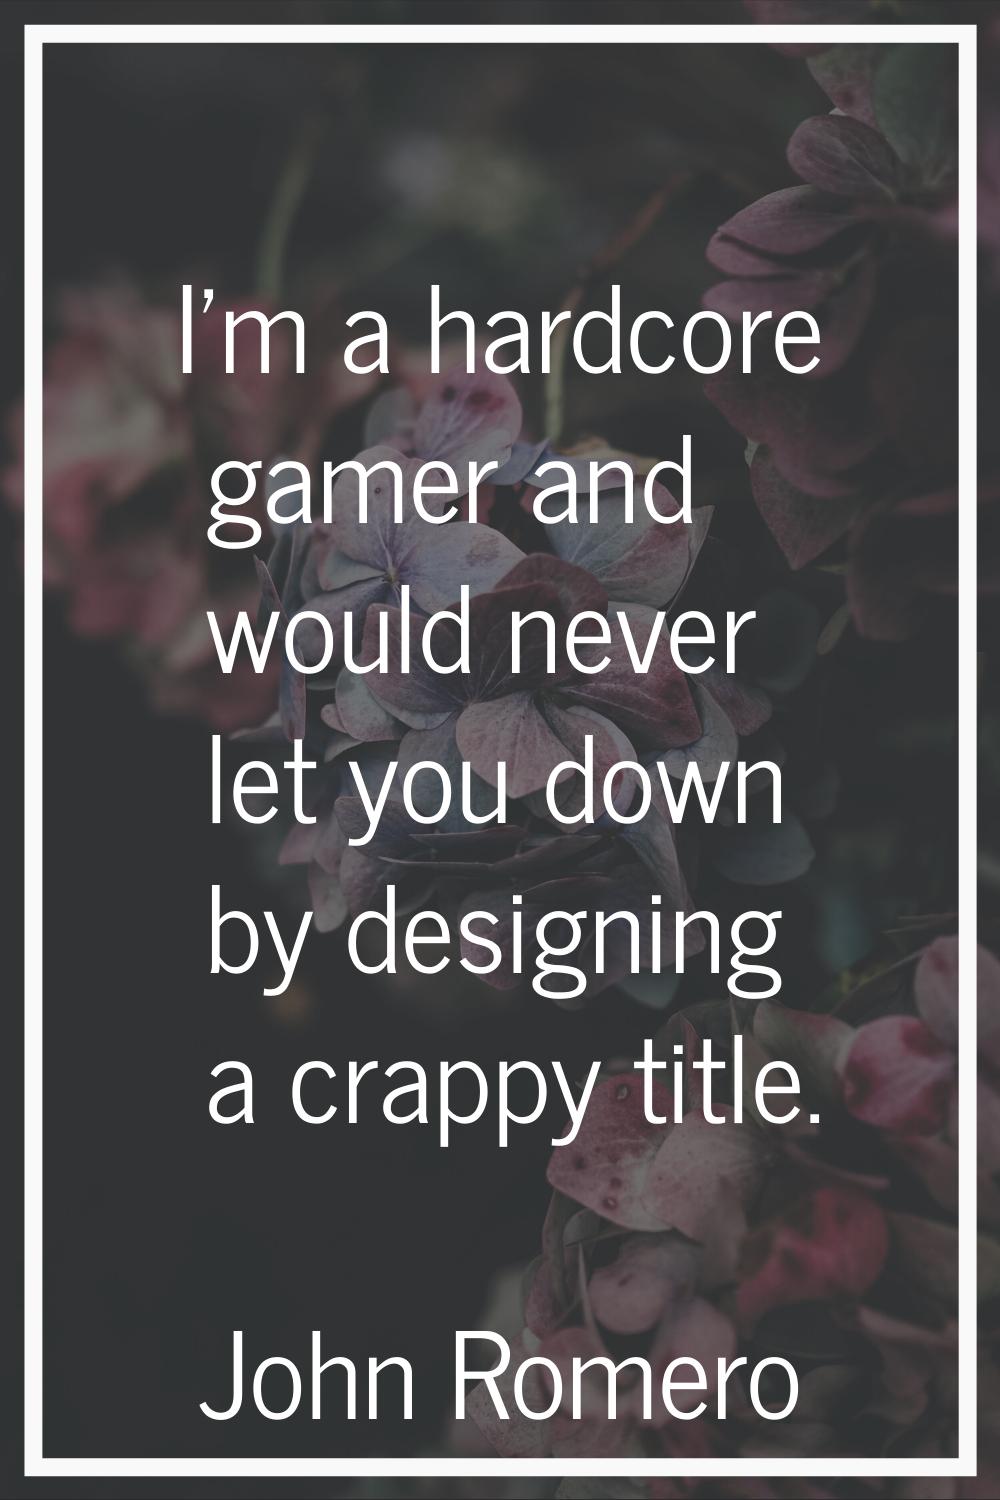 I'm a hardcore gamer and would never let you down by designing a crappy title.